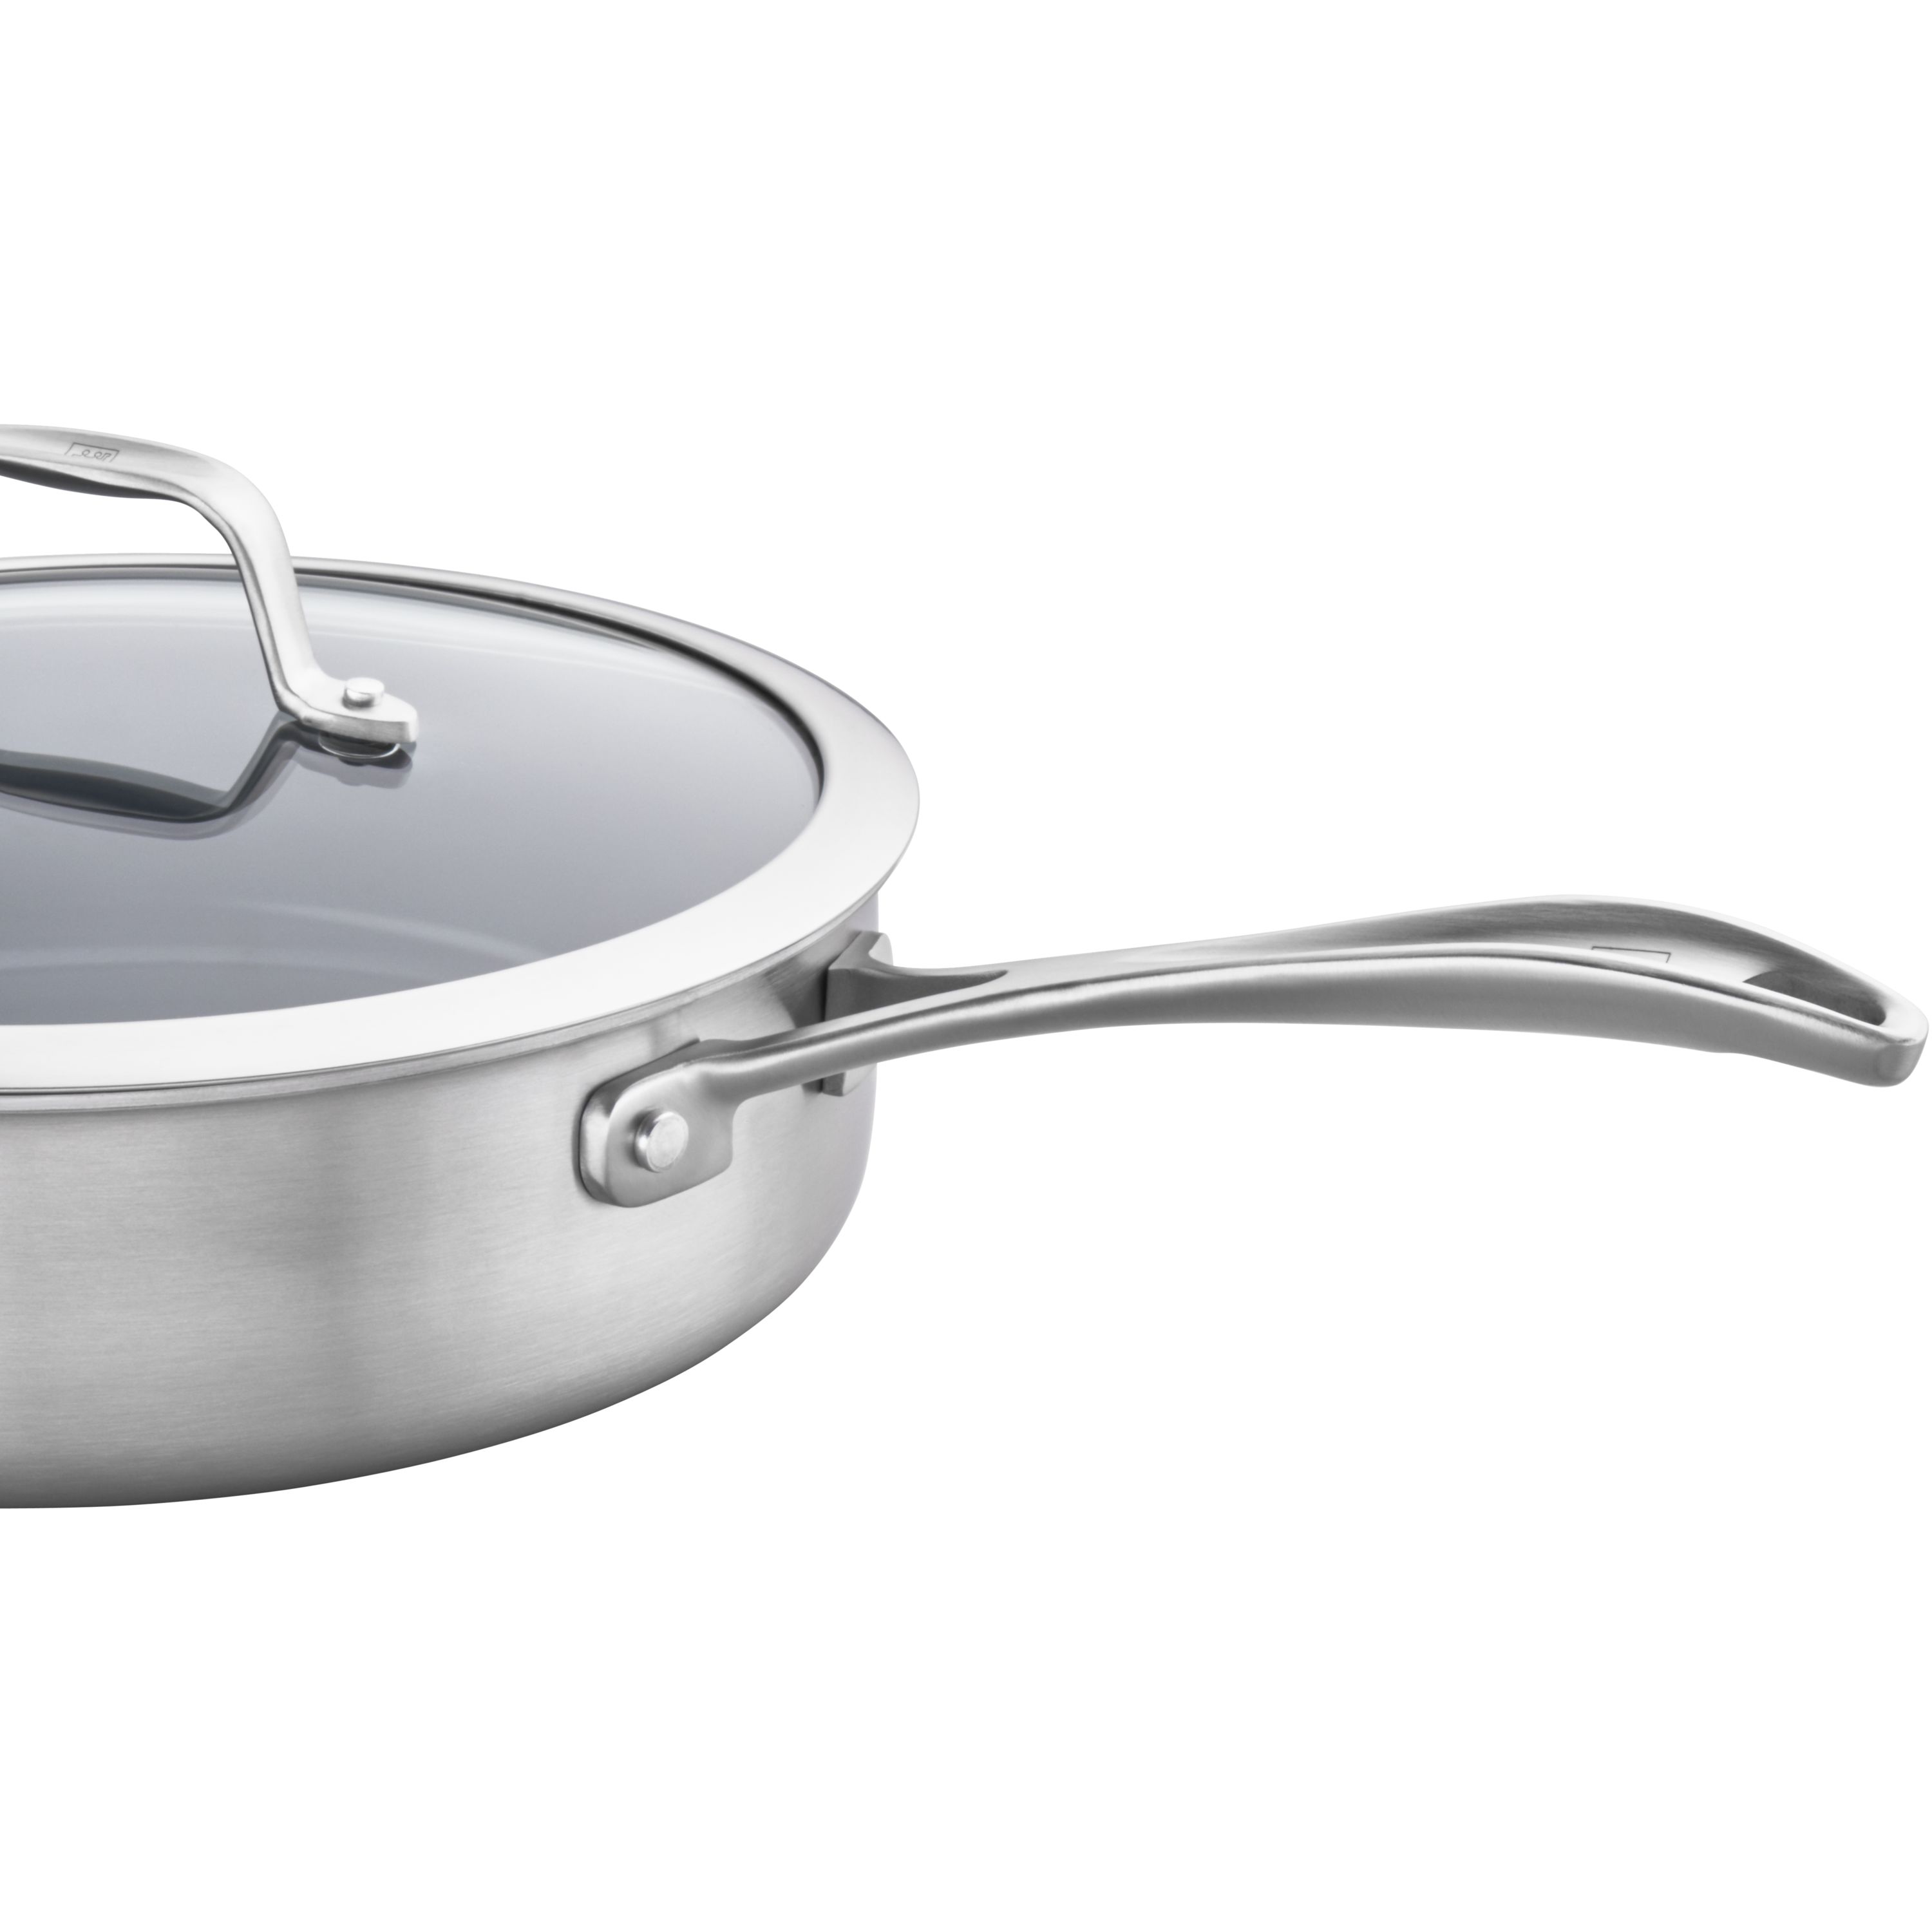 Zwilling Commercial Stainless Steel Rondeau Pan Without A Lid - 18-Qt